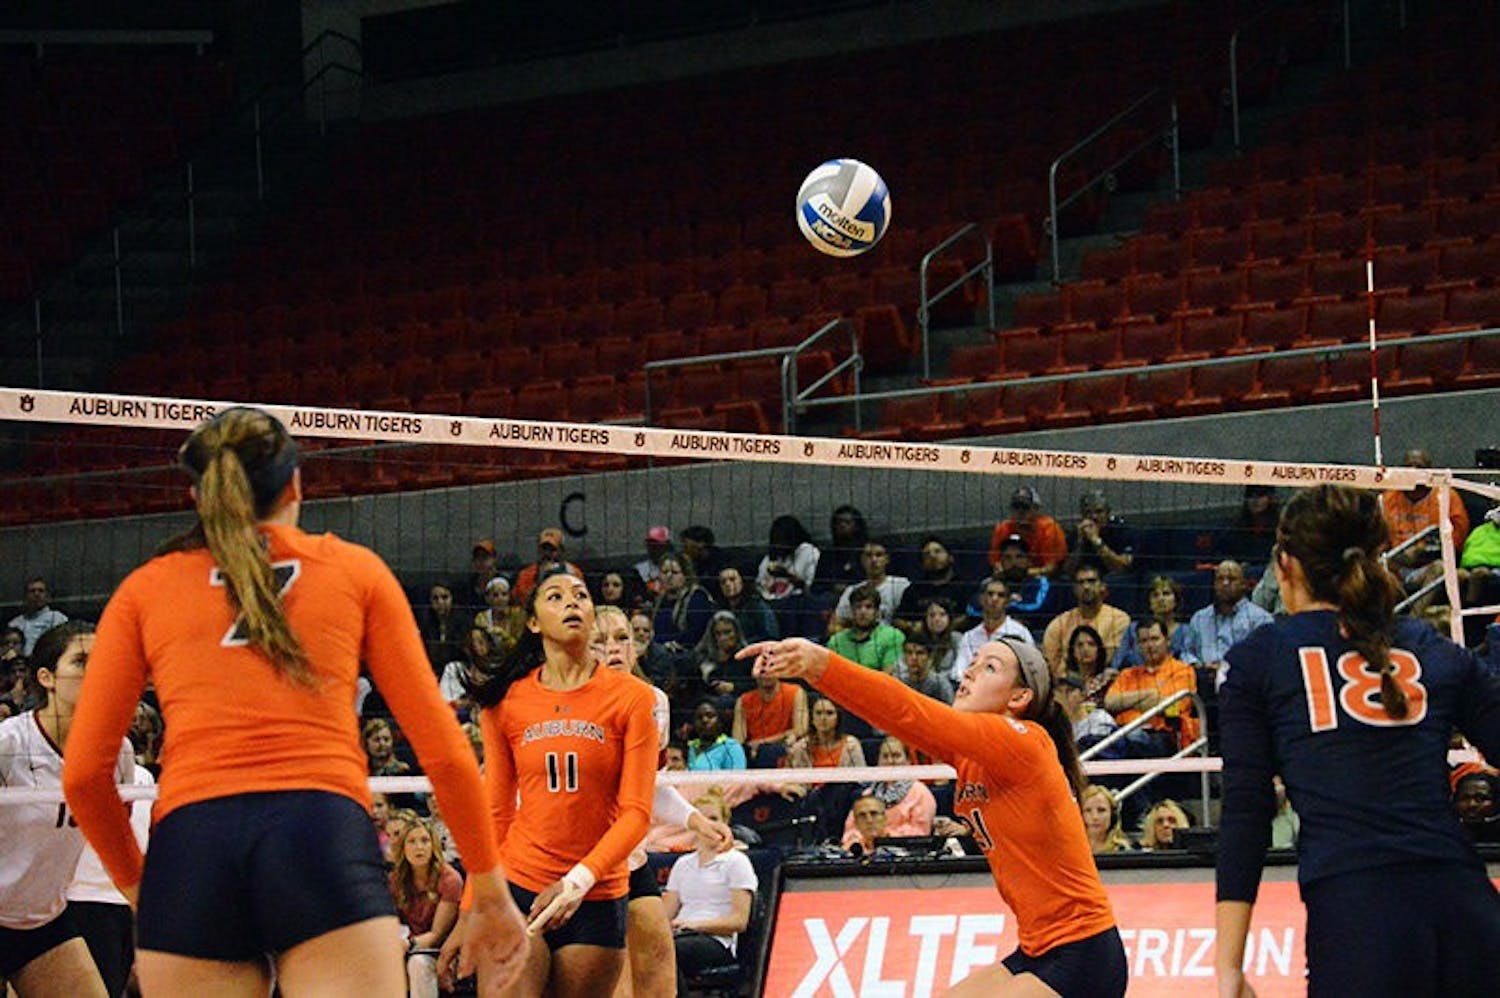 Alexa Filley #21 hits ball during Auburn vs Alabama volleyball game on Oct 22, 2014. (Emily Enfinger | Assistant Photo Editor)